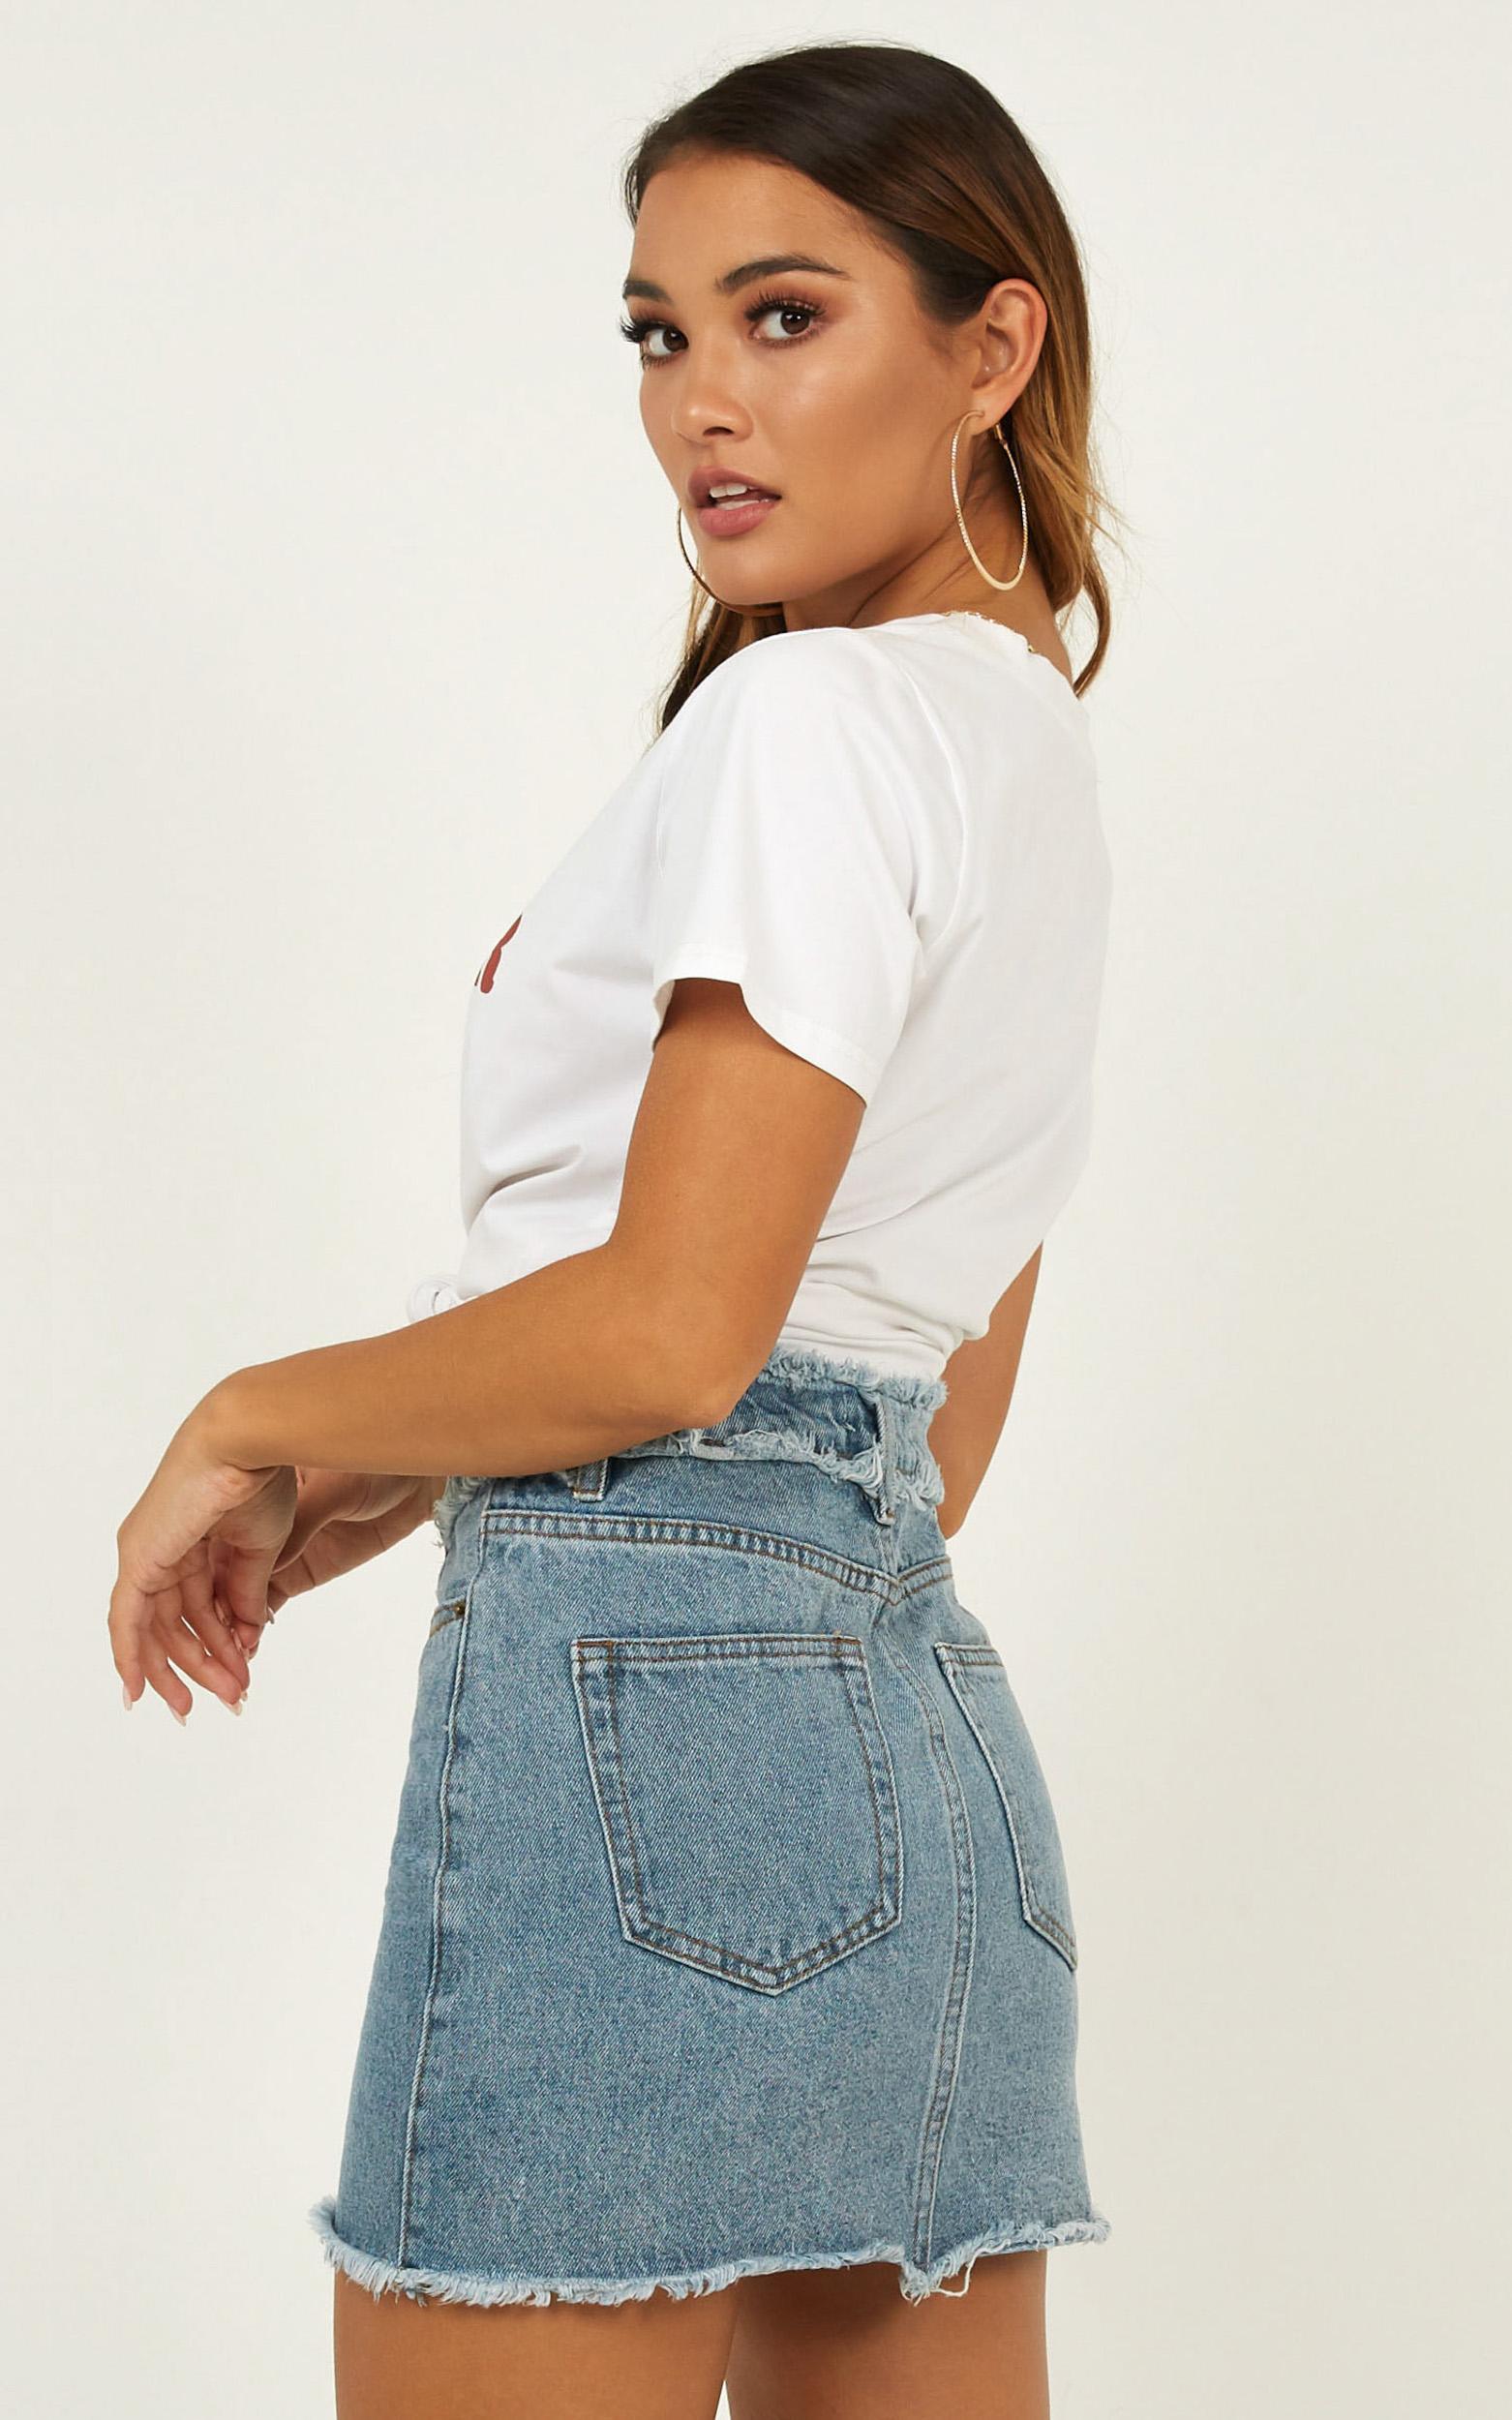 No Stopping Us denim skirt in mid wash - 14 (XL), Blue, hi-res image number null